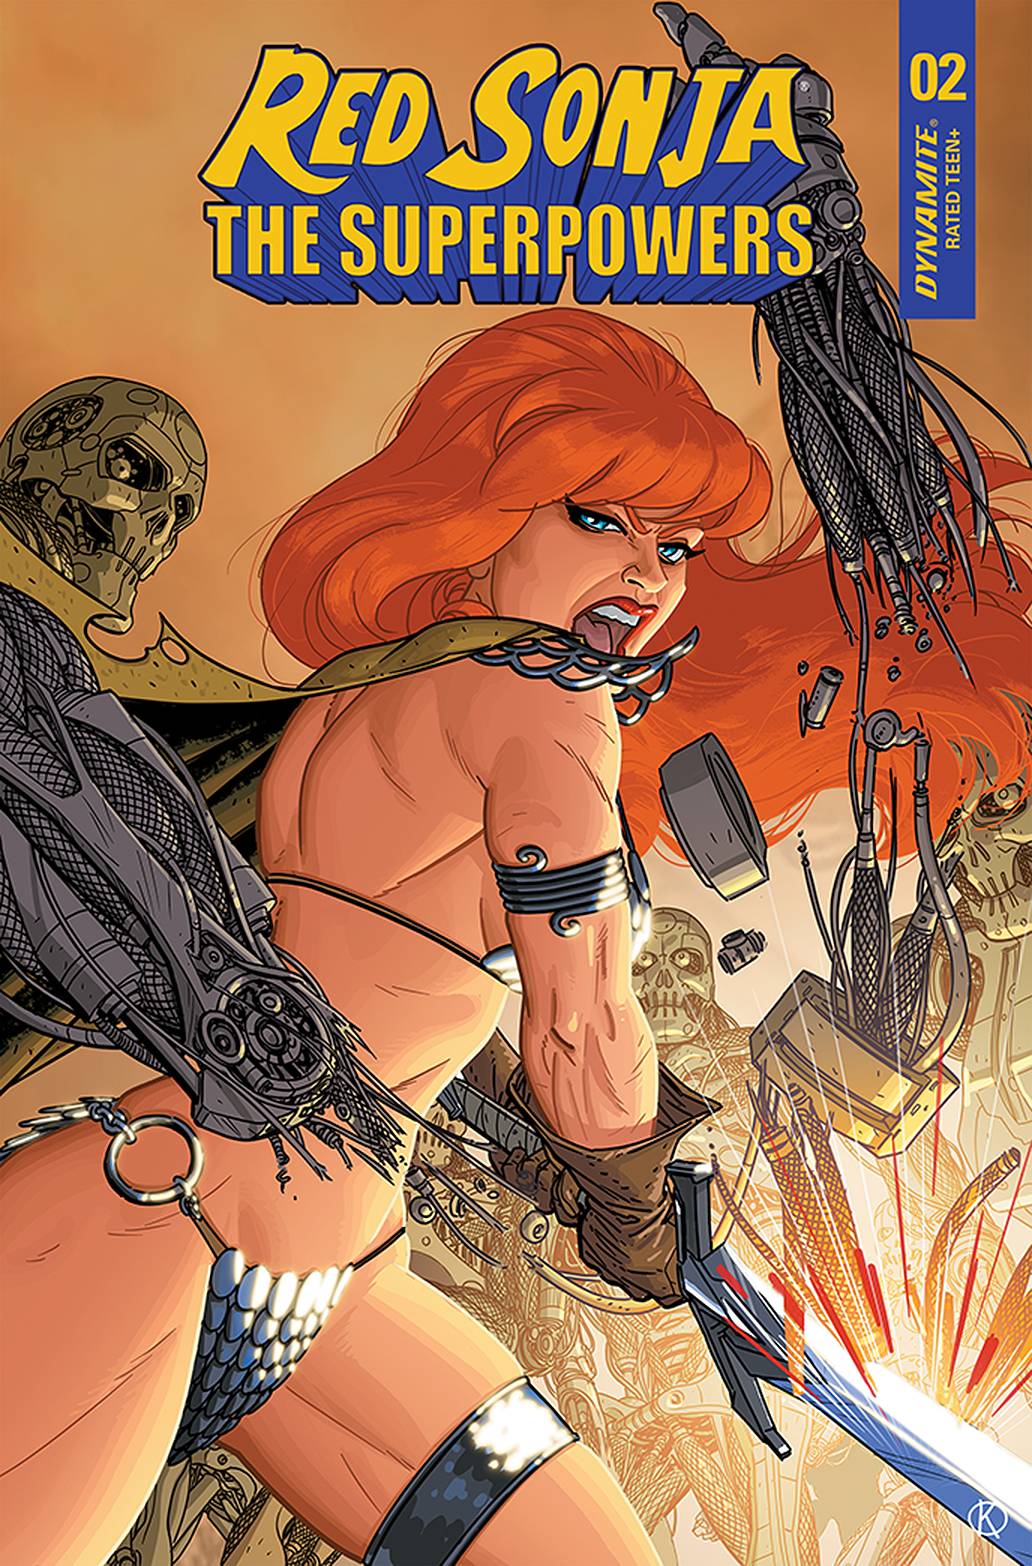 RED SONJA THE SUPERPOWERS #2 15 COPY KANO INCV (REL 02/10/2021)